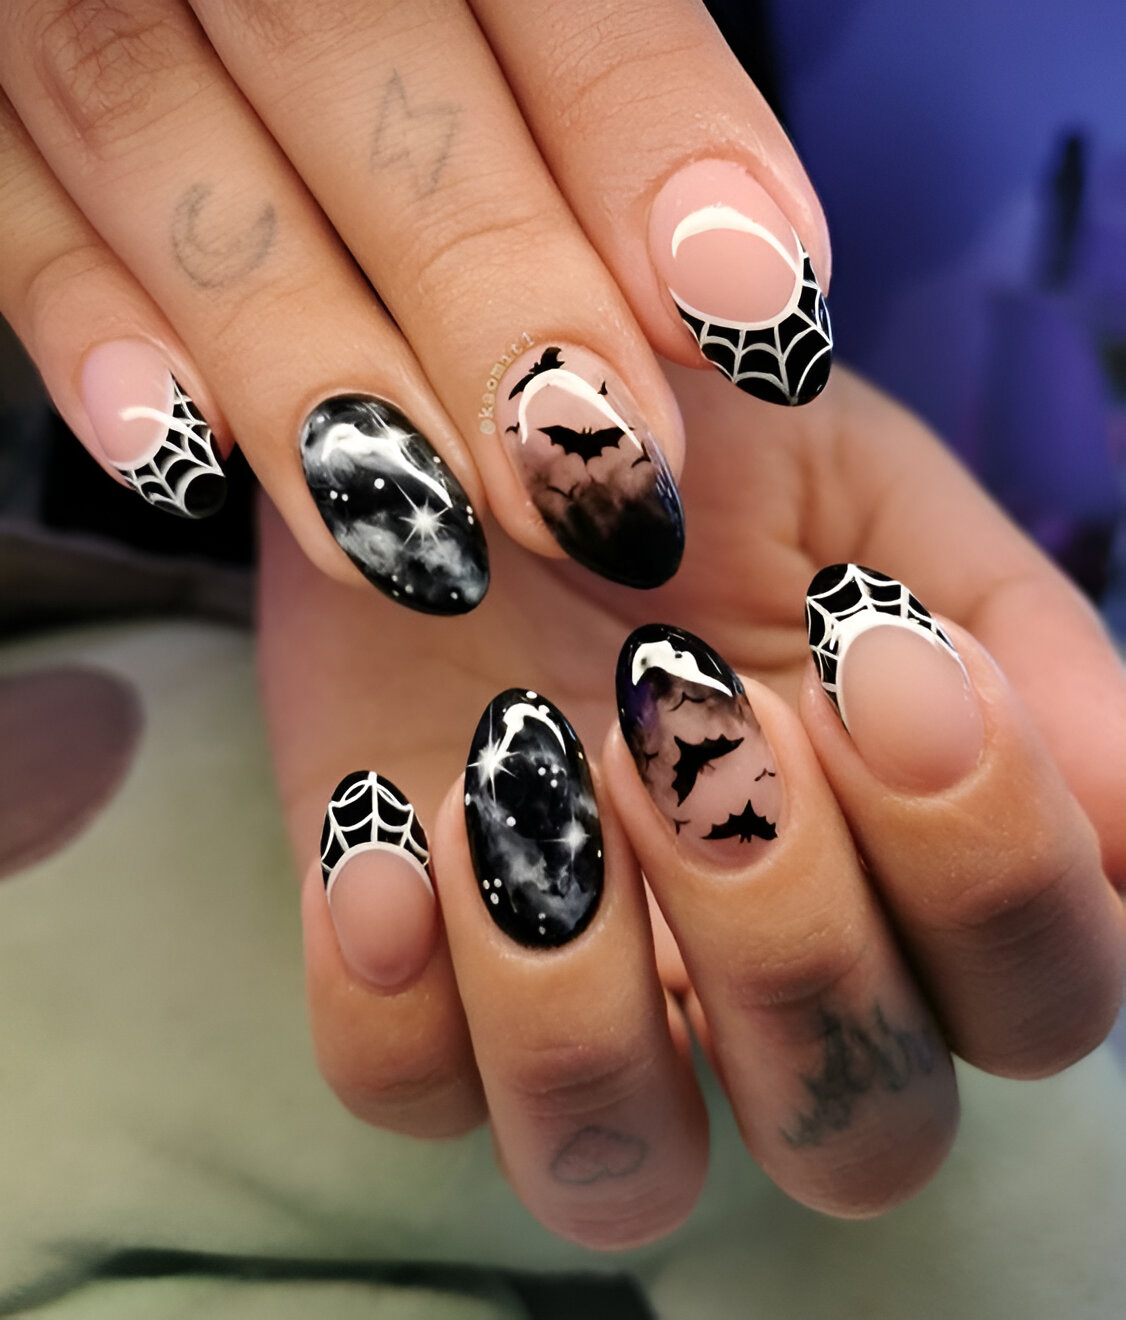 Mix-And-Match Short Halloween Nails With Bats